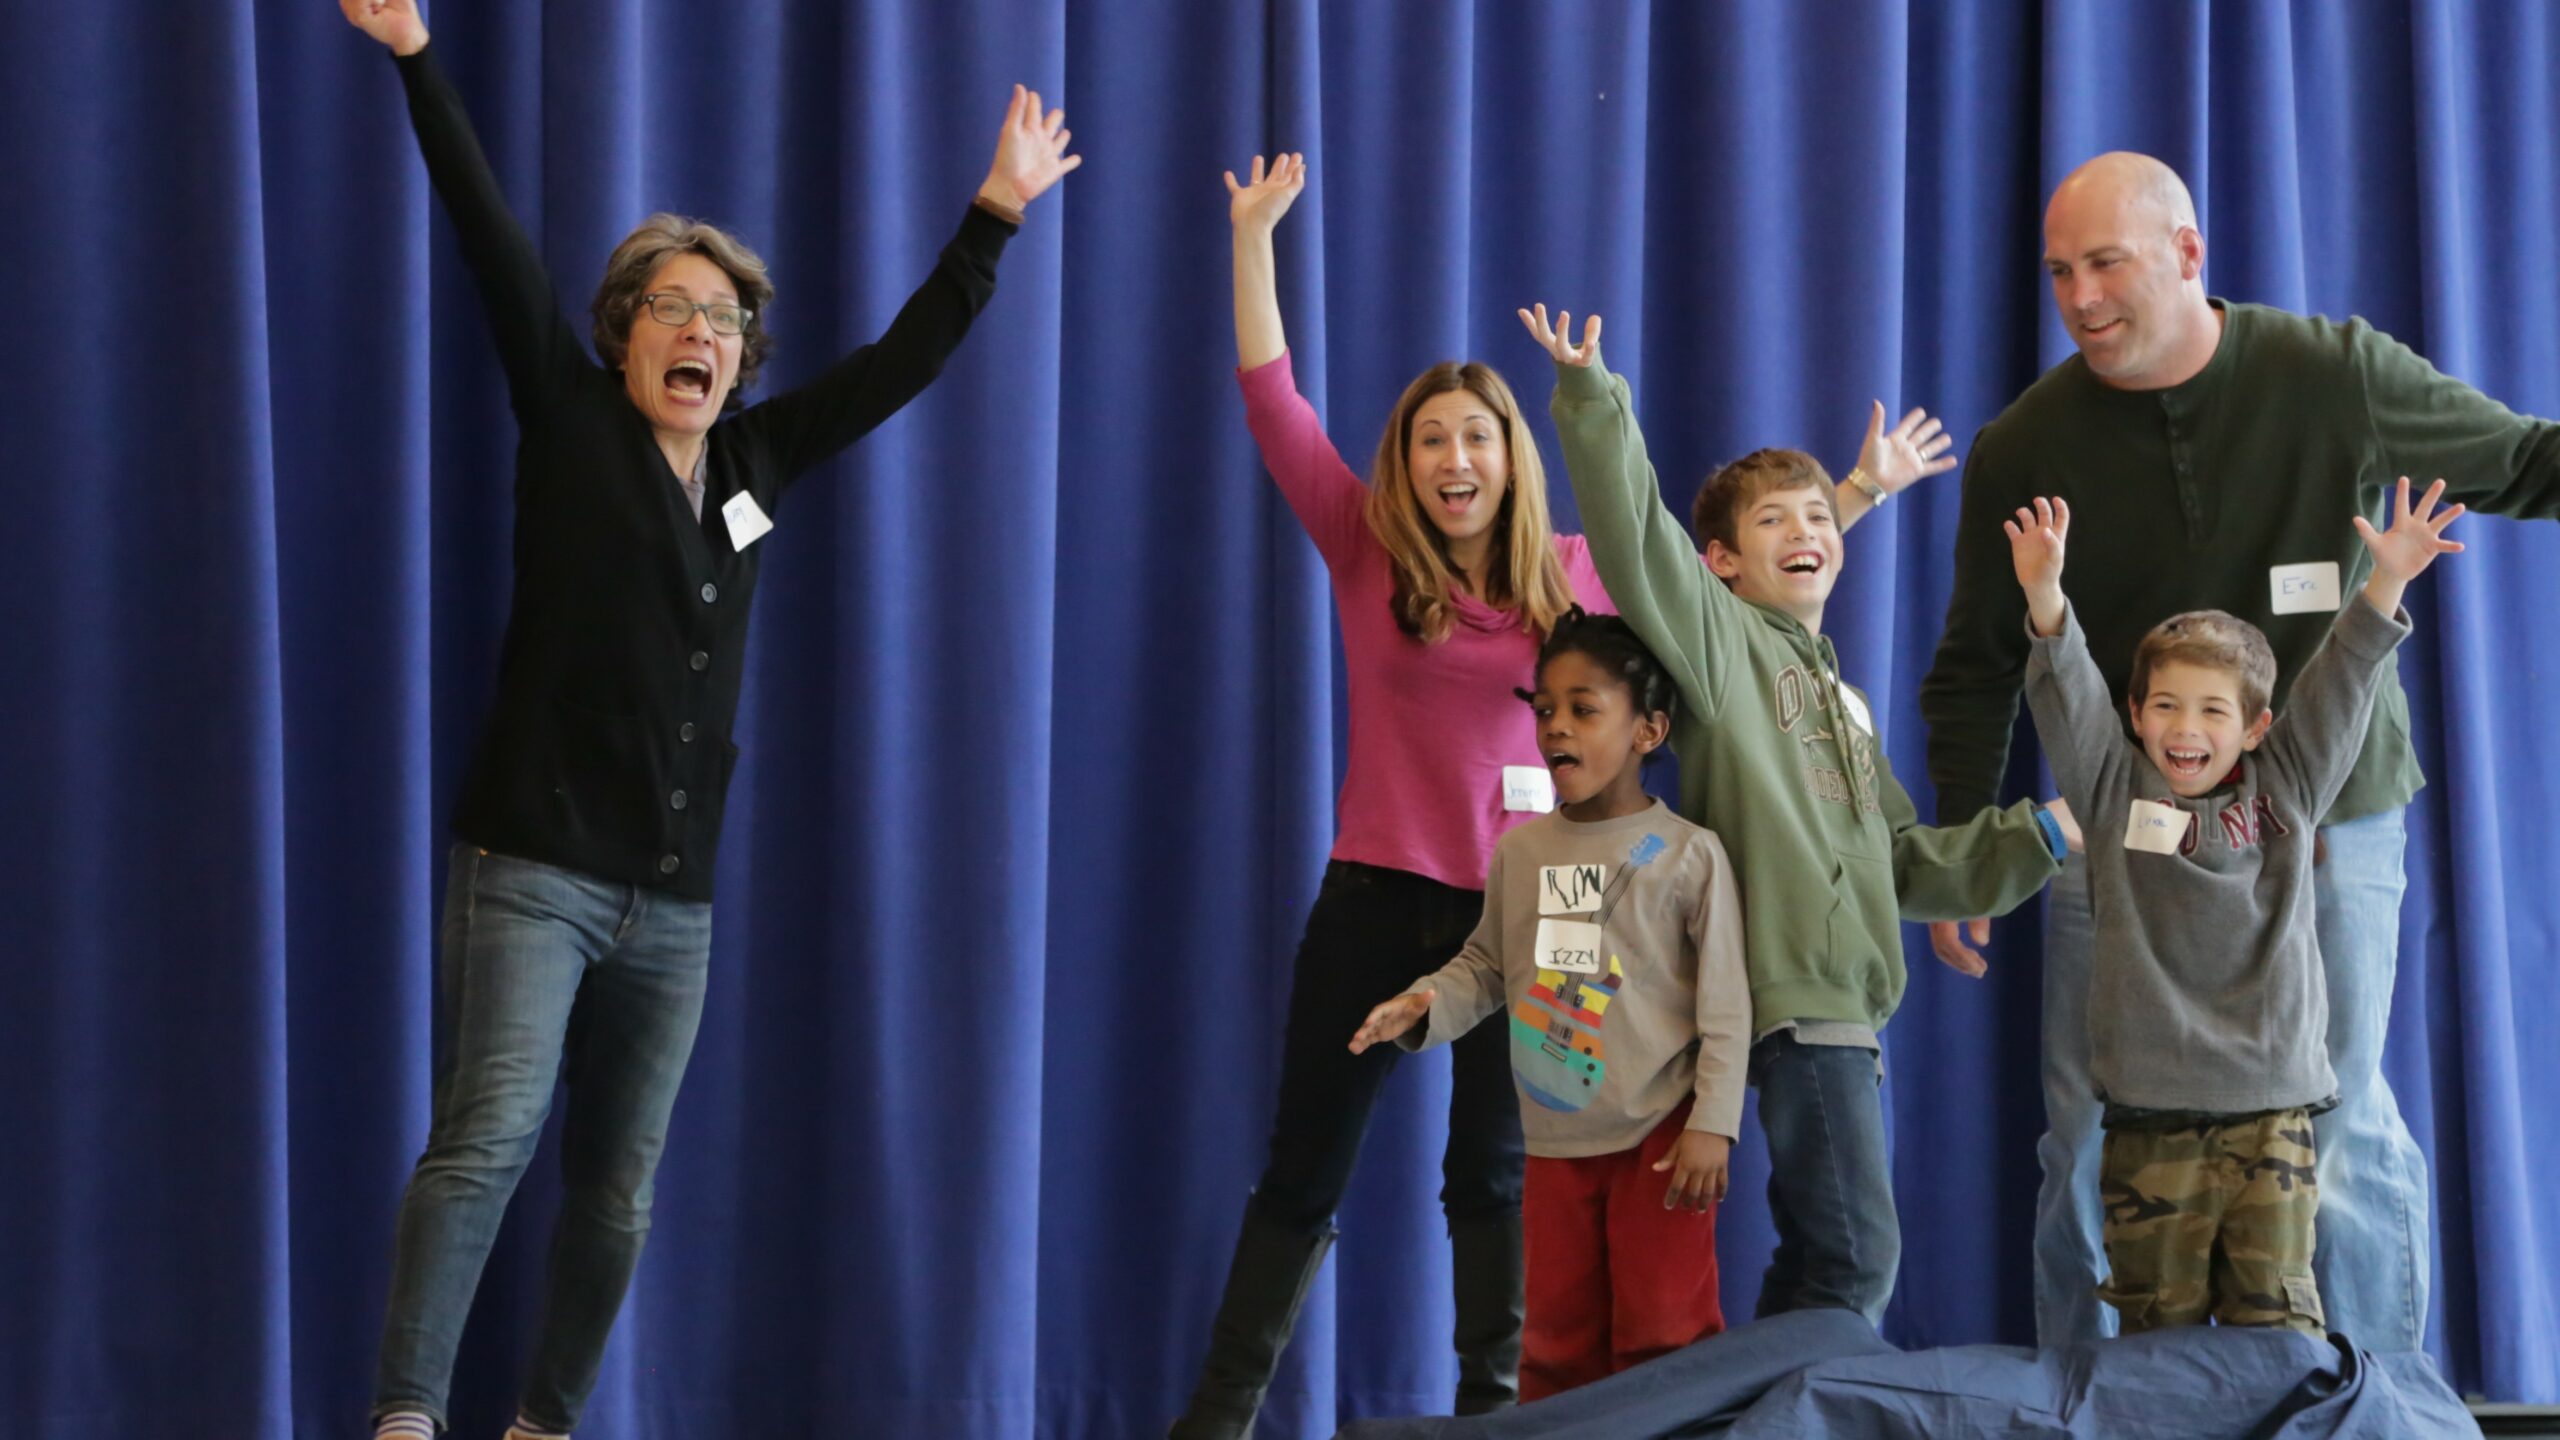 Three adults and three kids smile and perform in front of a blue curtain with their arms in the air.